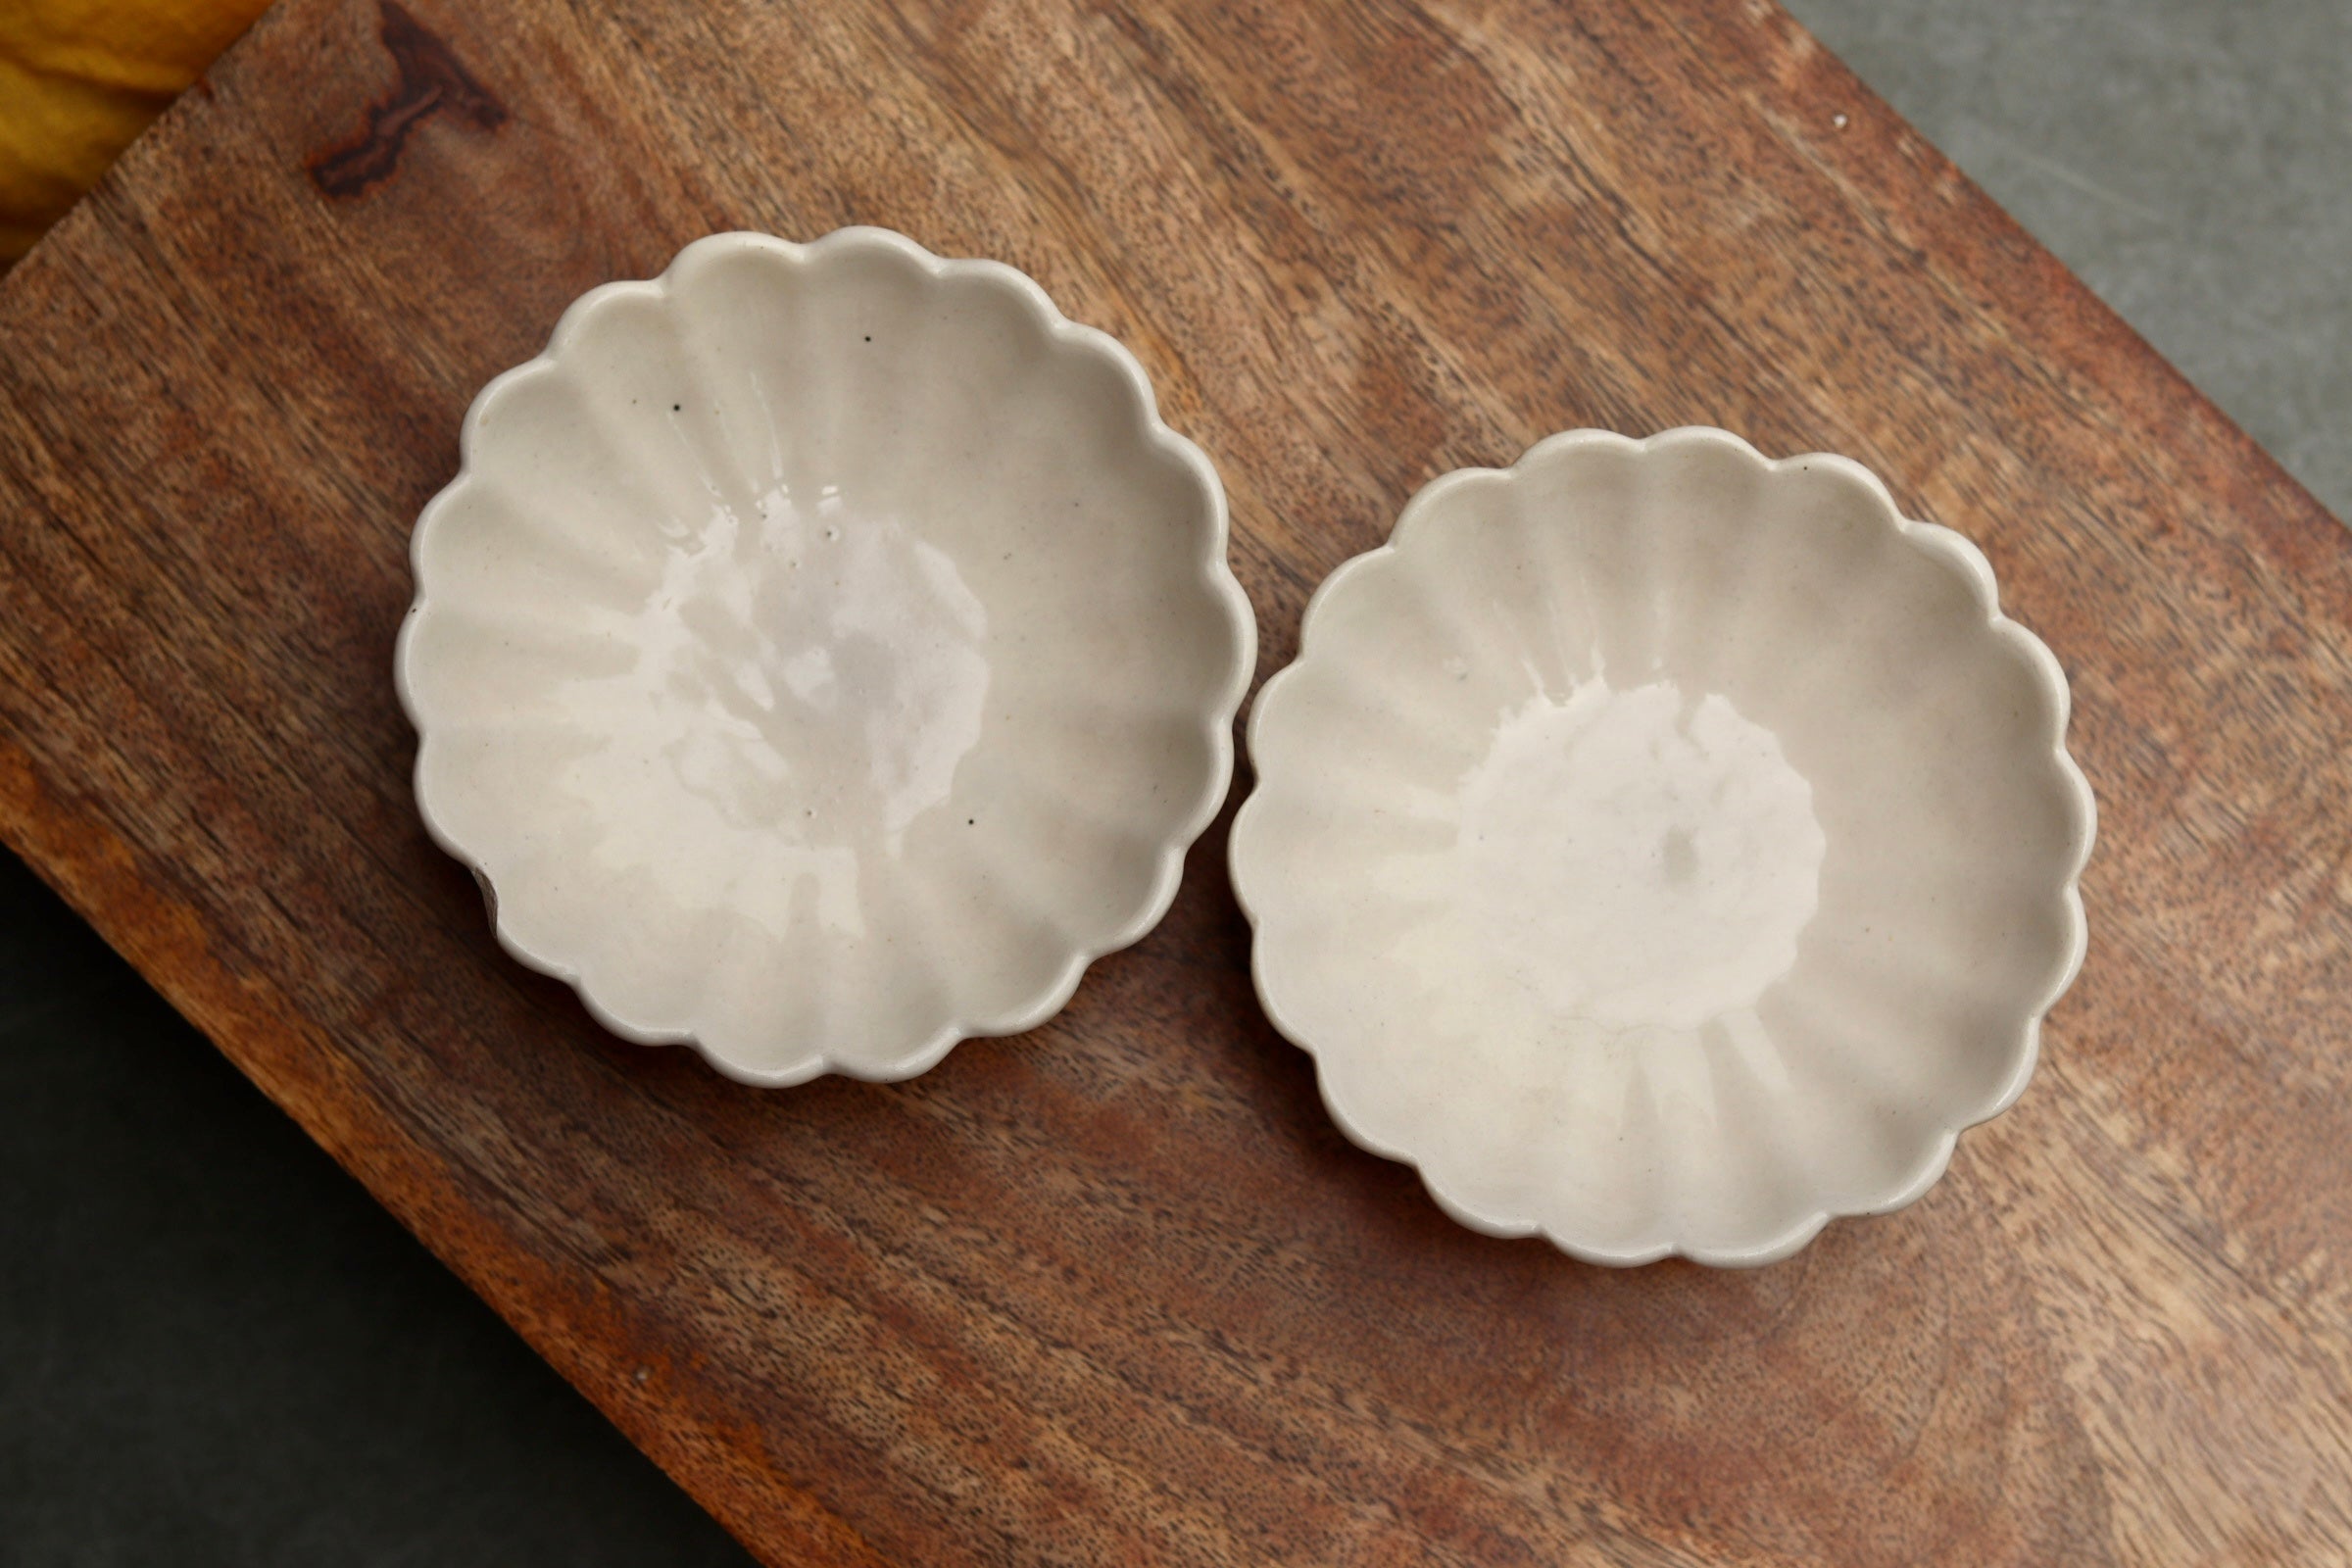 Two handmade ceramic ice cream bowls on wooden surface